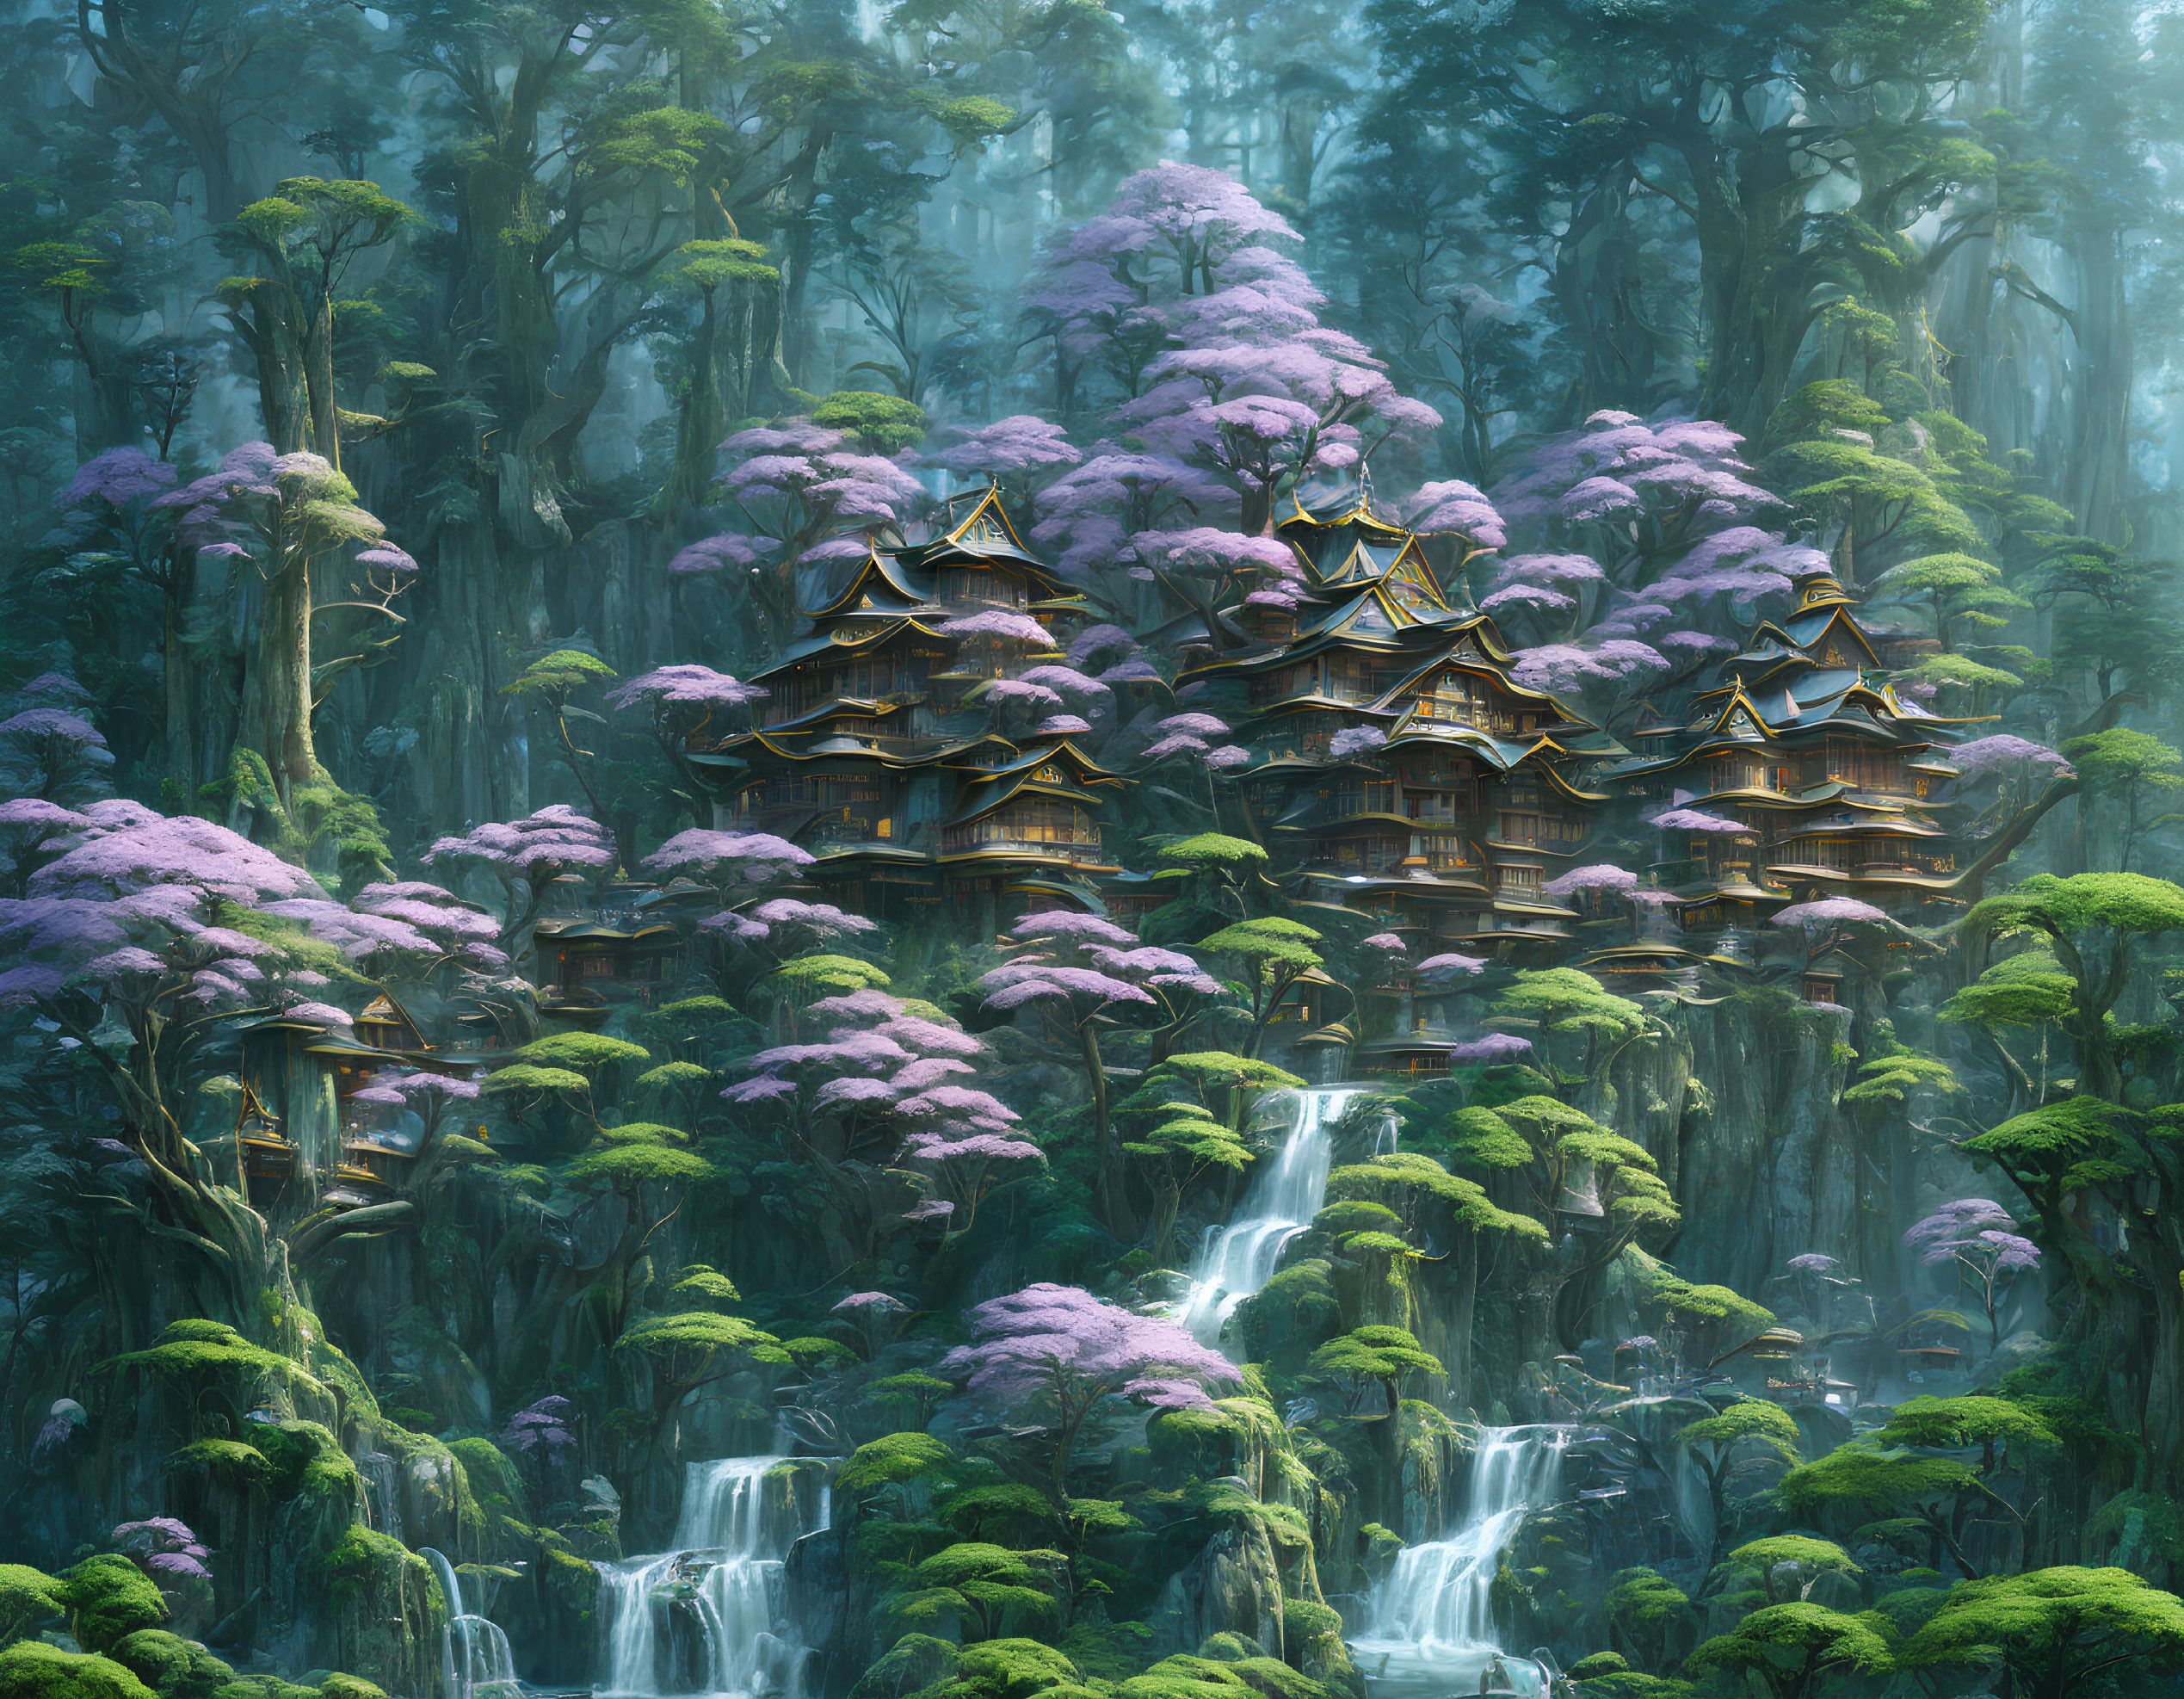 Traditional Asian architecture surrounded by purple foliage and waterfalls in a serene forest